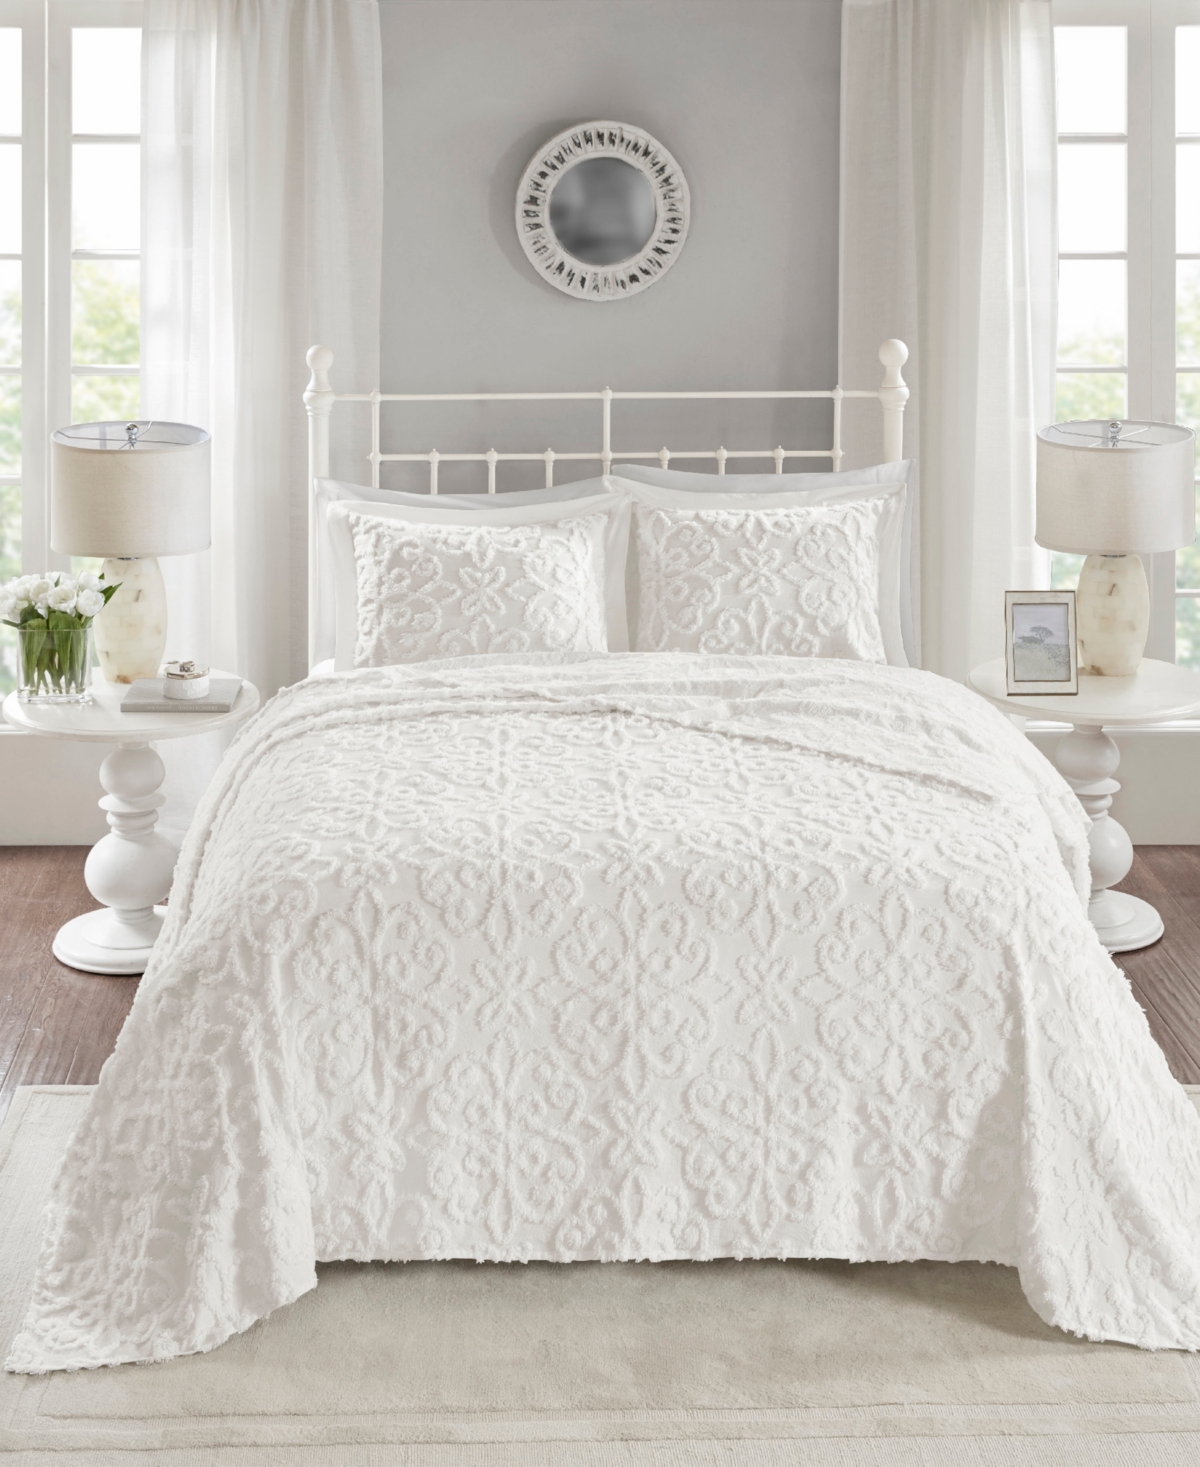 Madison Park Sabrina Tufted Chenille 3-pc. Bedspread Set, Full/queen In Taupe